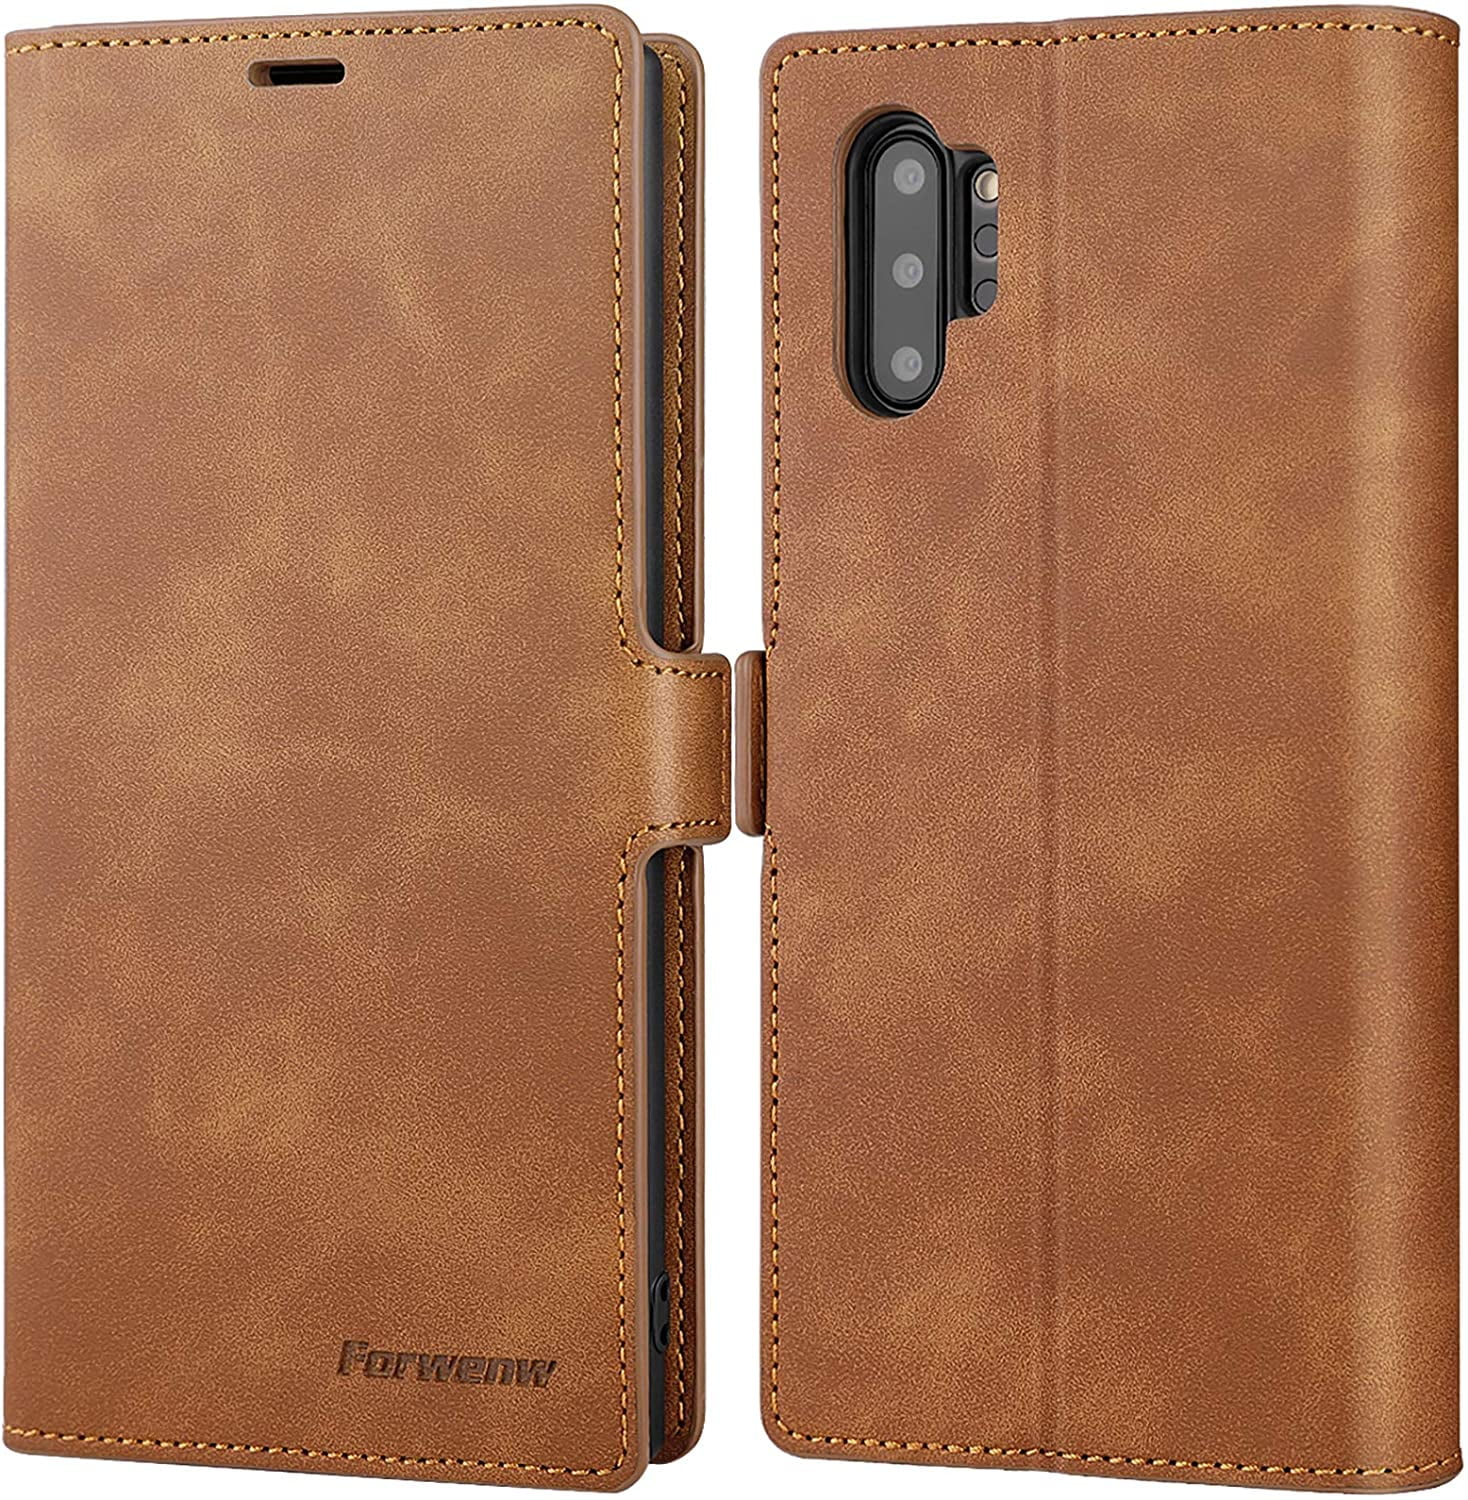 Cover for Samsung Galaxy Note10 Plus Leather Kickstand Mobile Phone Cover Card Holders Extra-Durable Business with Free Waterproof-Bag Samsung Galaxy Note10 Plus Flip Case 